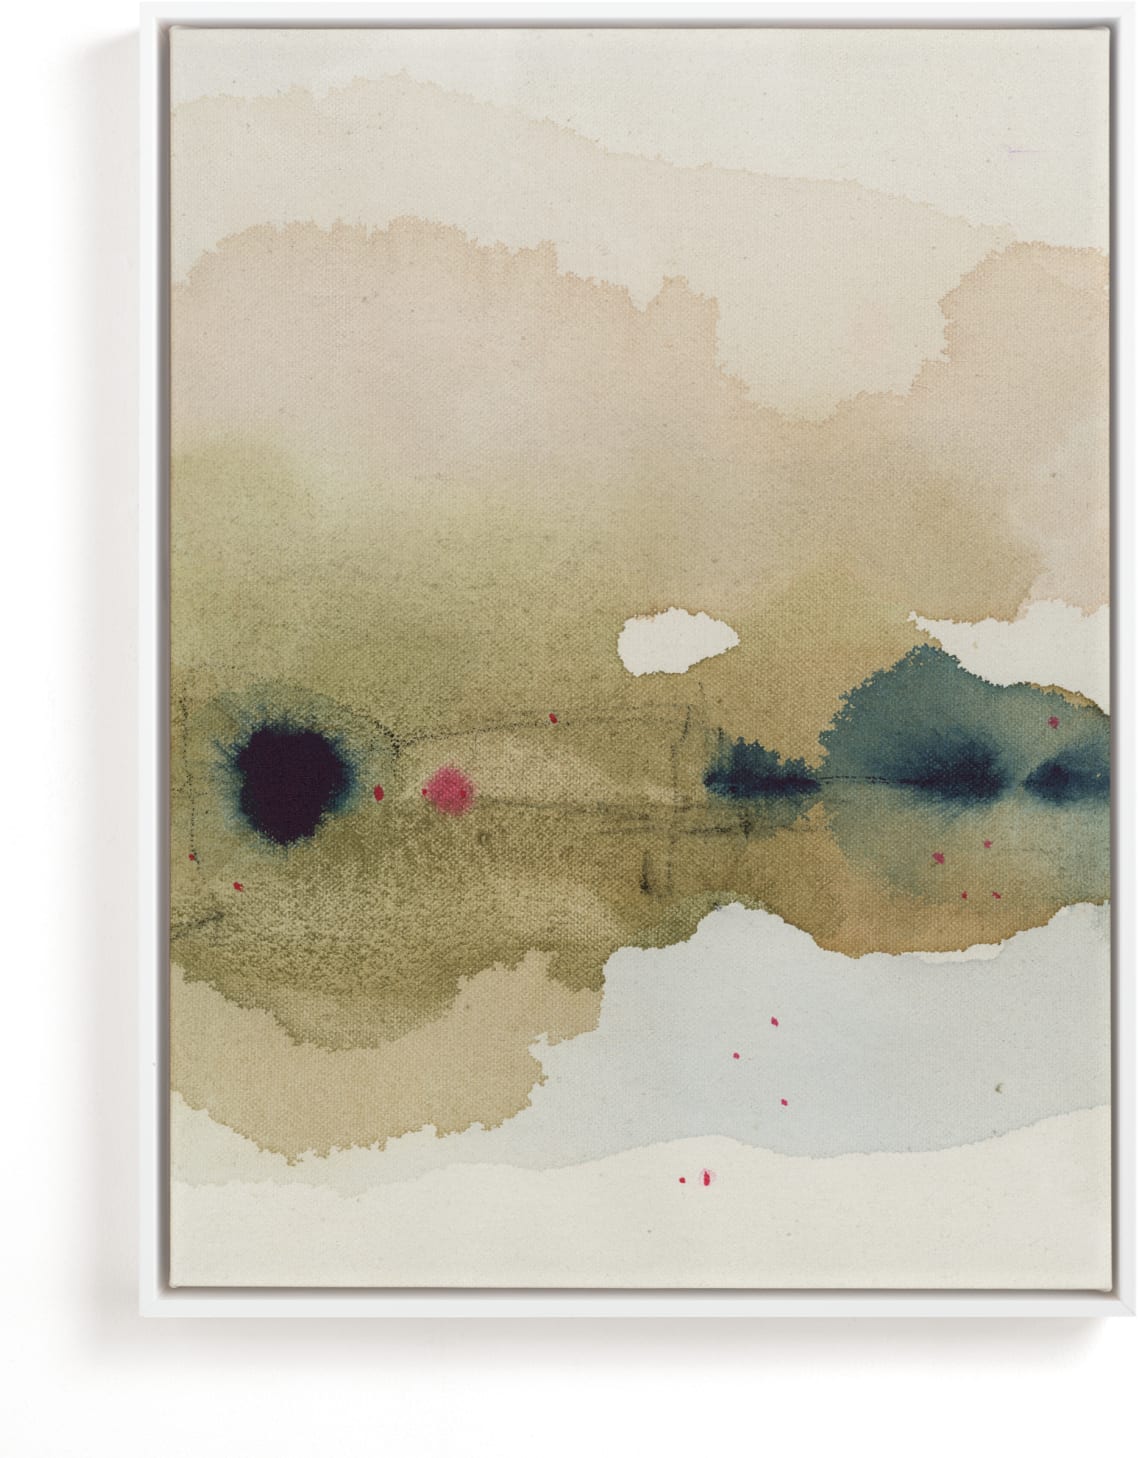 This is a brown, beige, red art by Shina Choi called Viridian Misty Lake I.